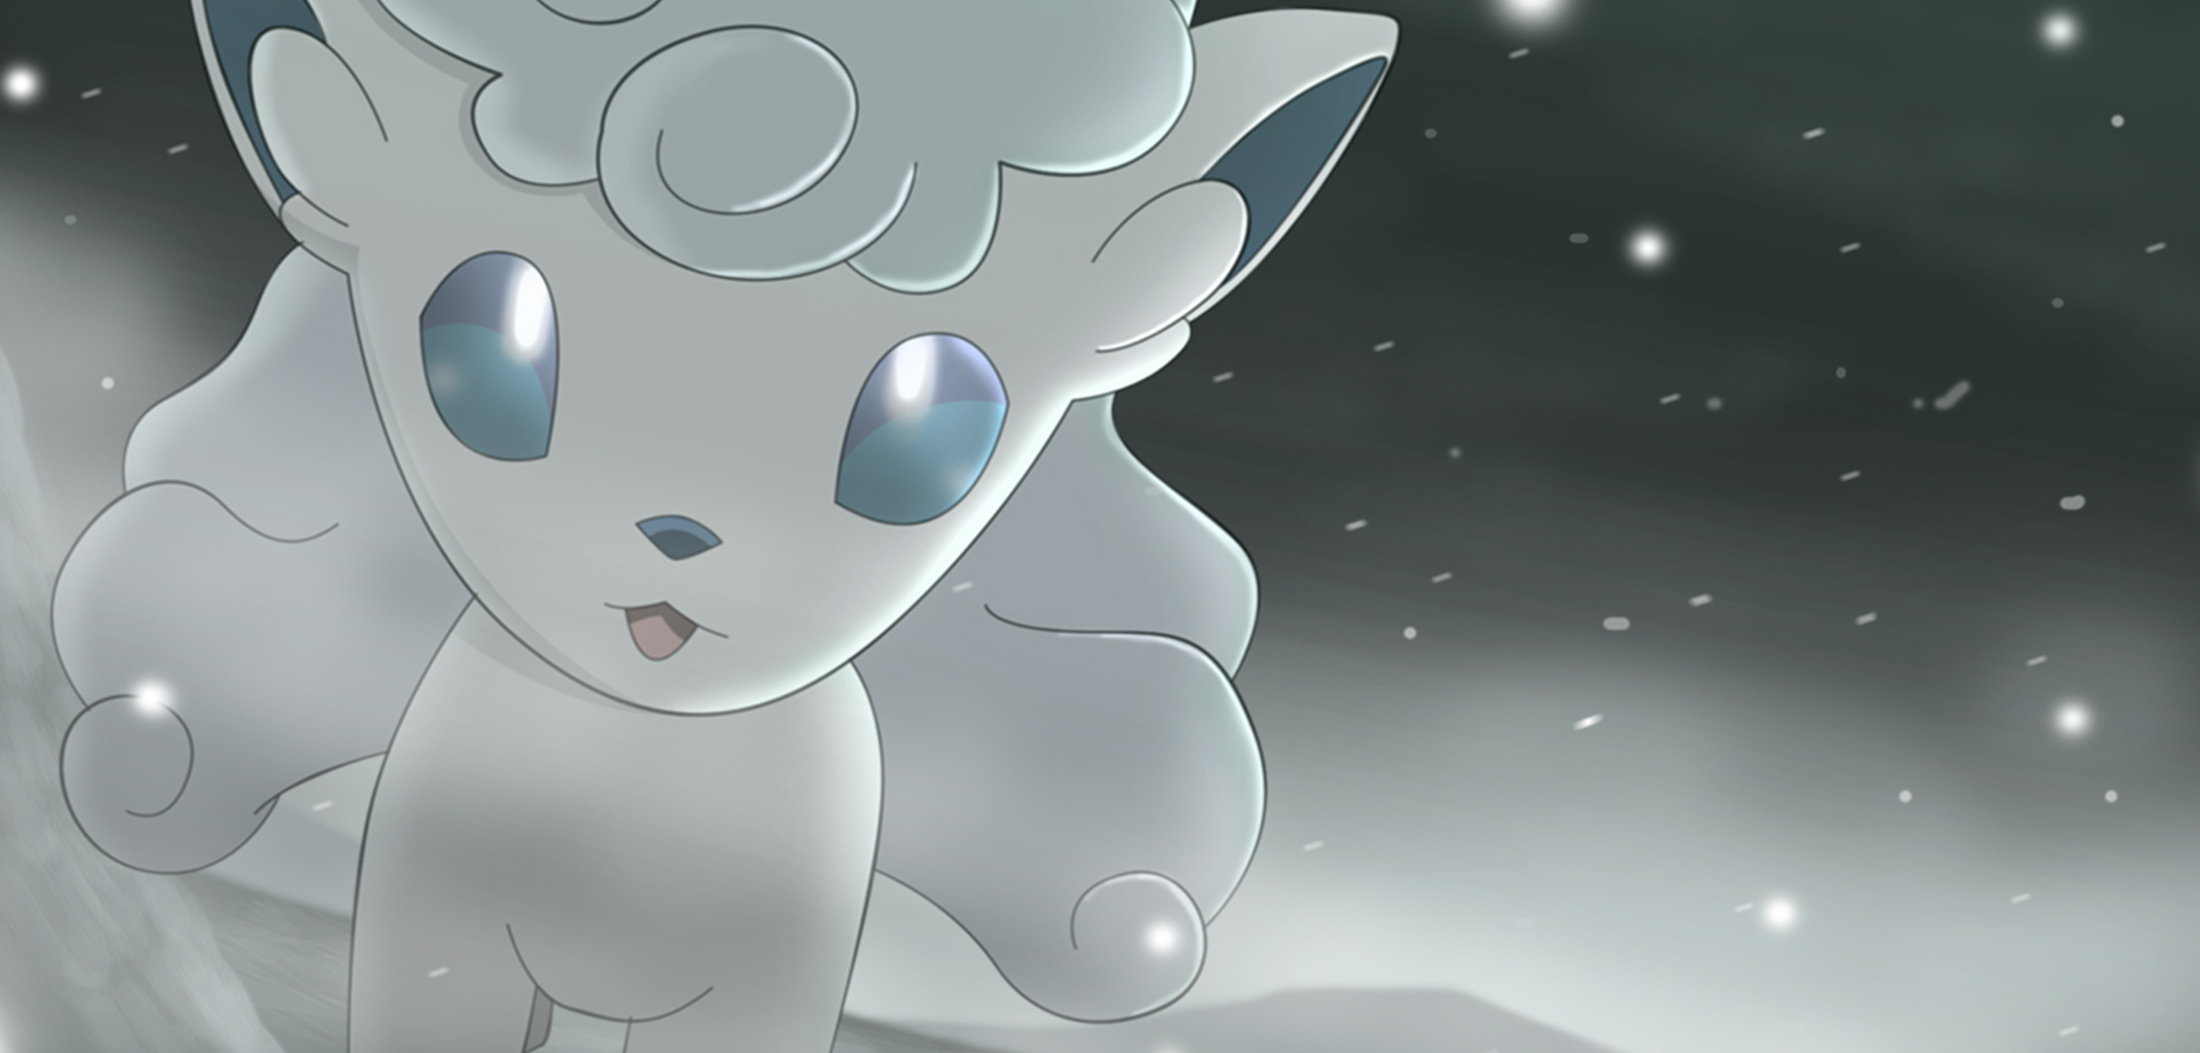 Alolan Vulpix By All0412 Wallpaper And Background Image